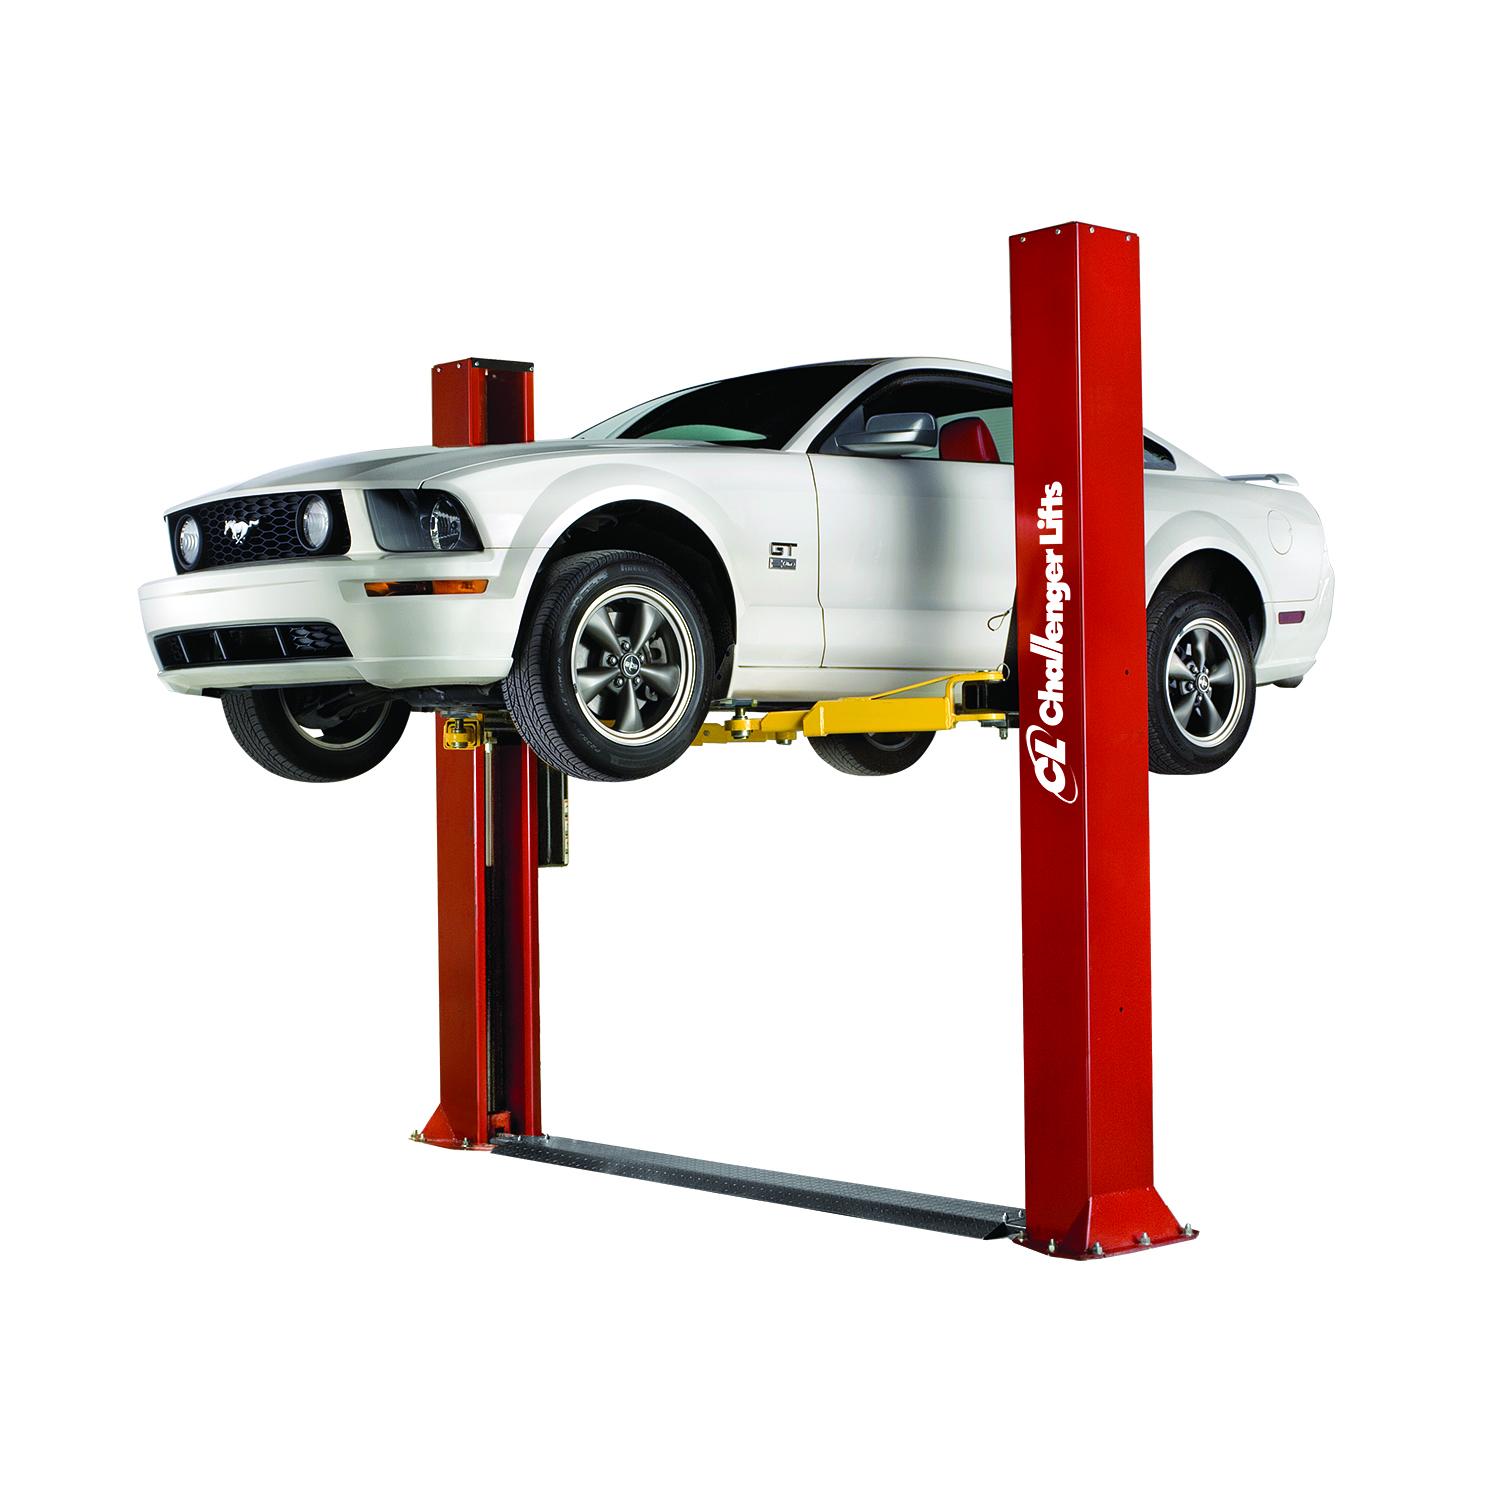 Challenger Lifts CLFP9 2 Post Low Ceiling Car Lift